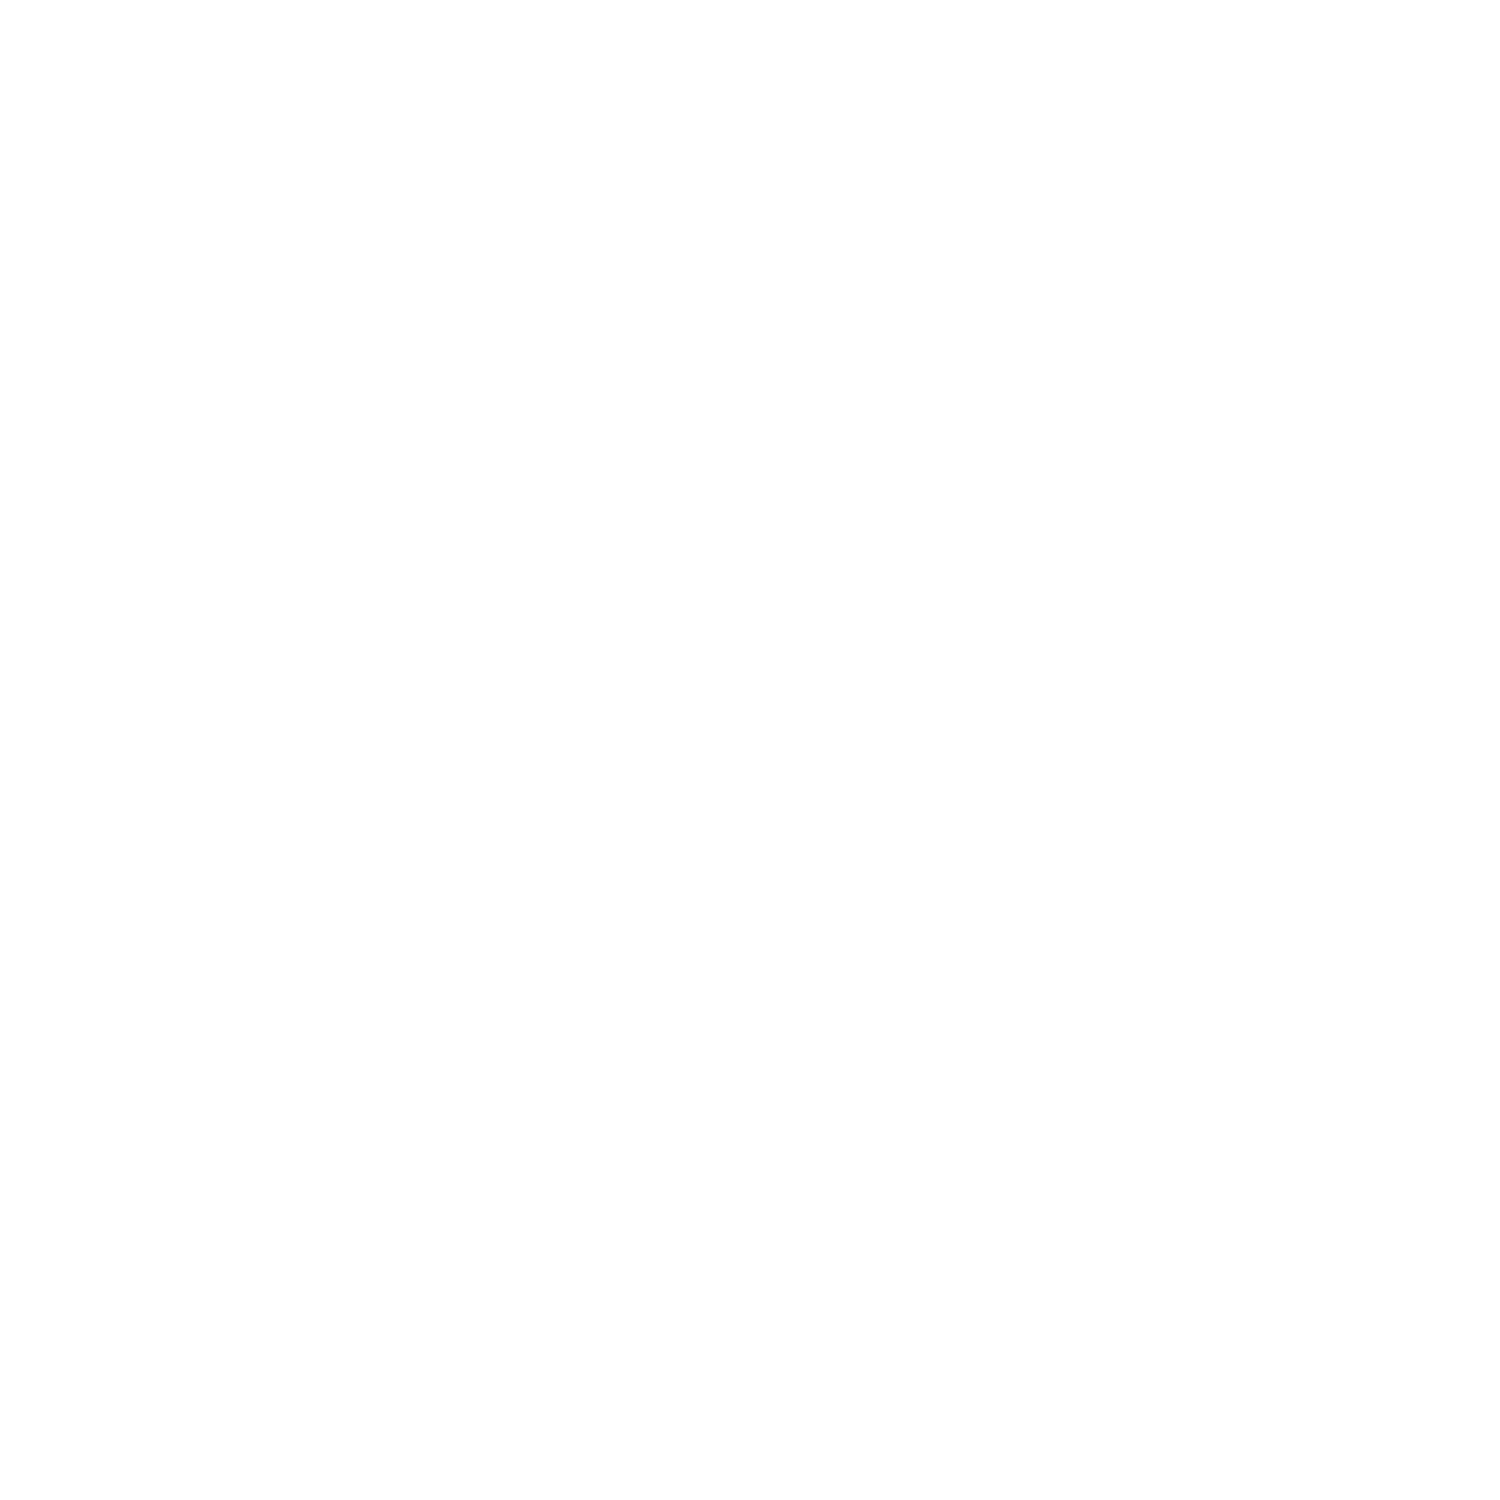 SIO Productions